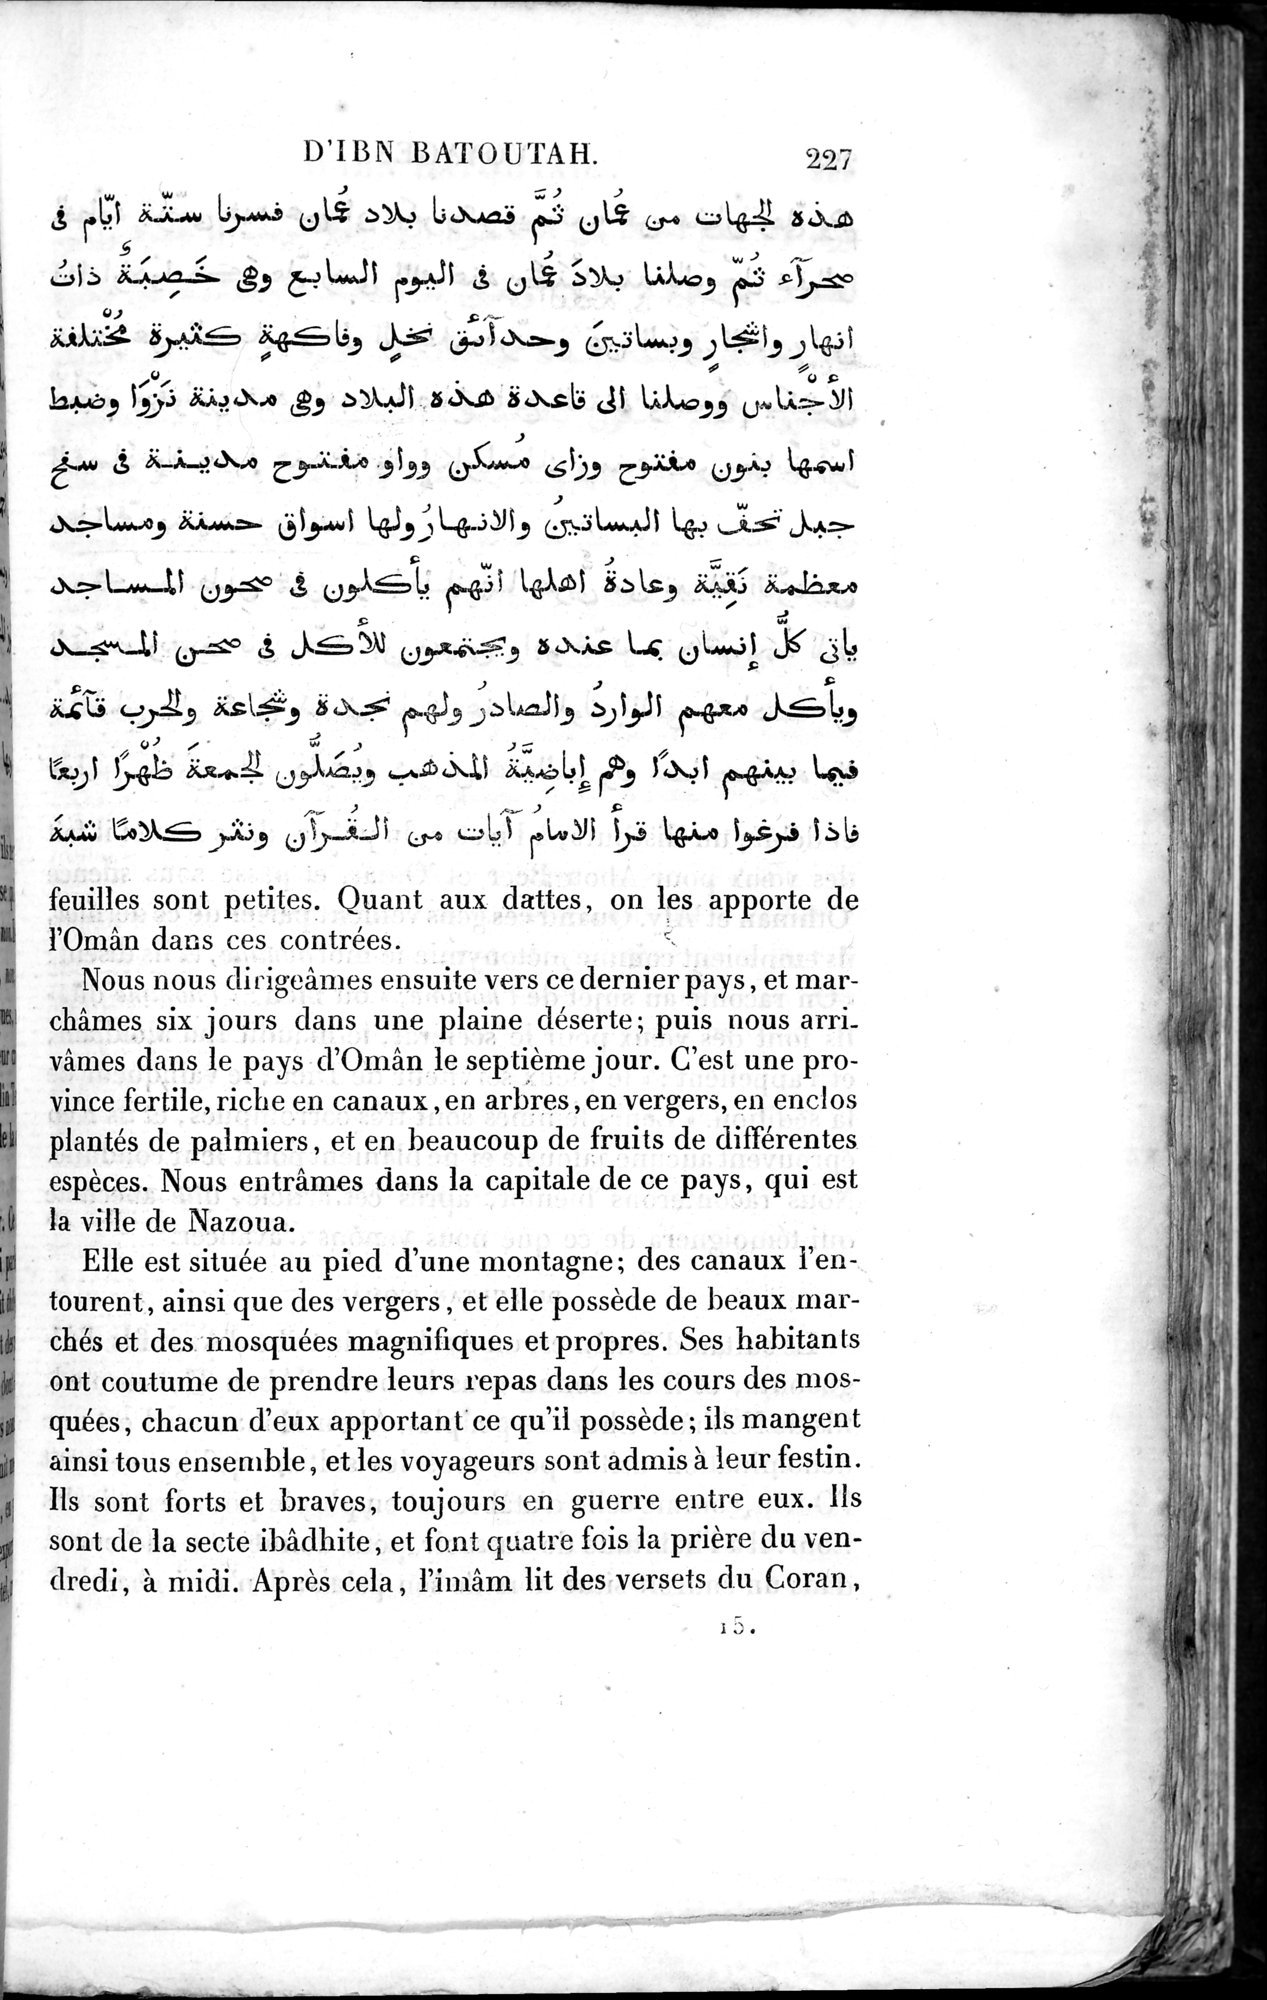 Voyages d'Ibn Batoutah : vol.2 / Page 255 (Grayscale High Resolution Image)